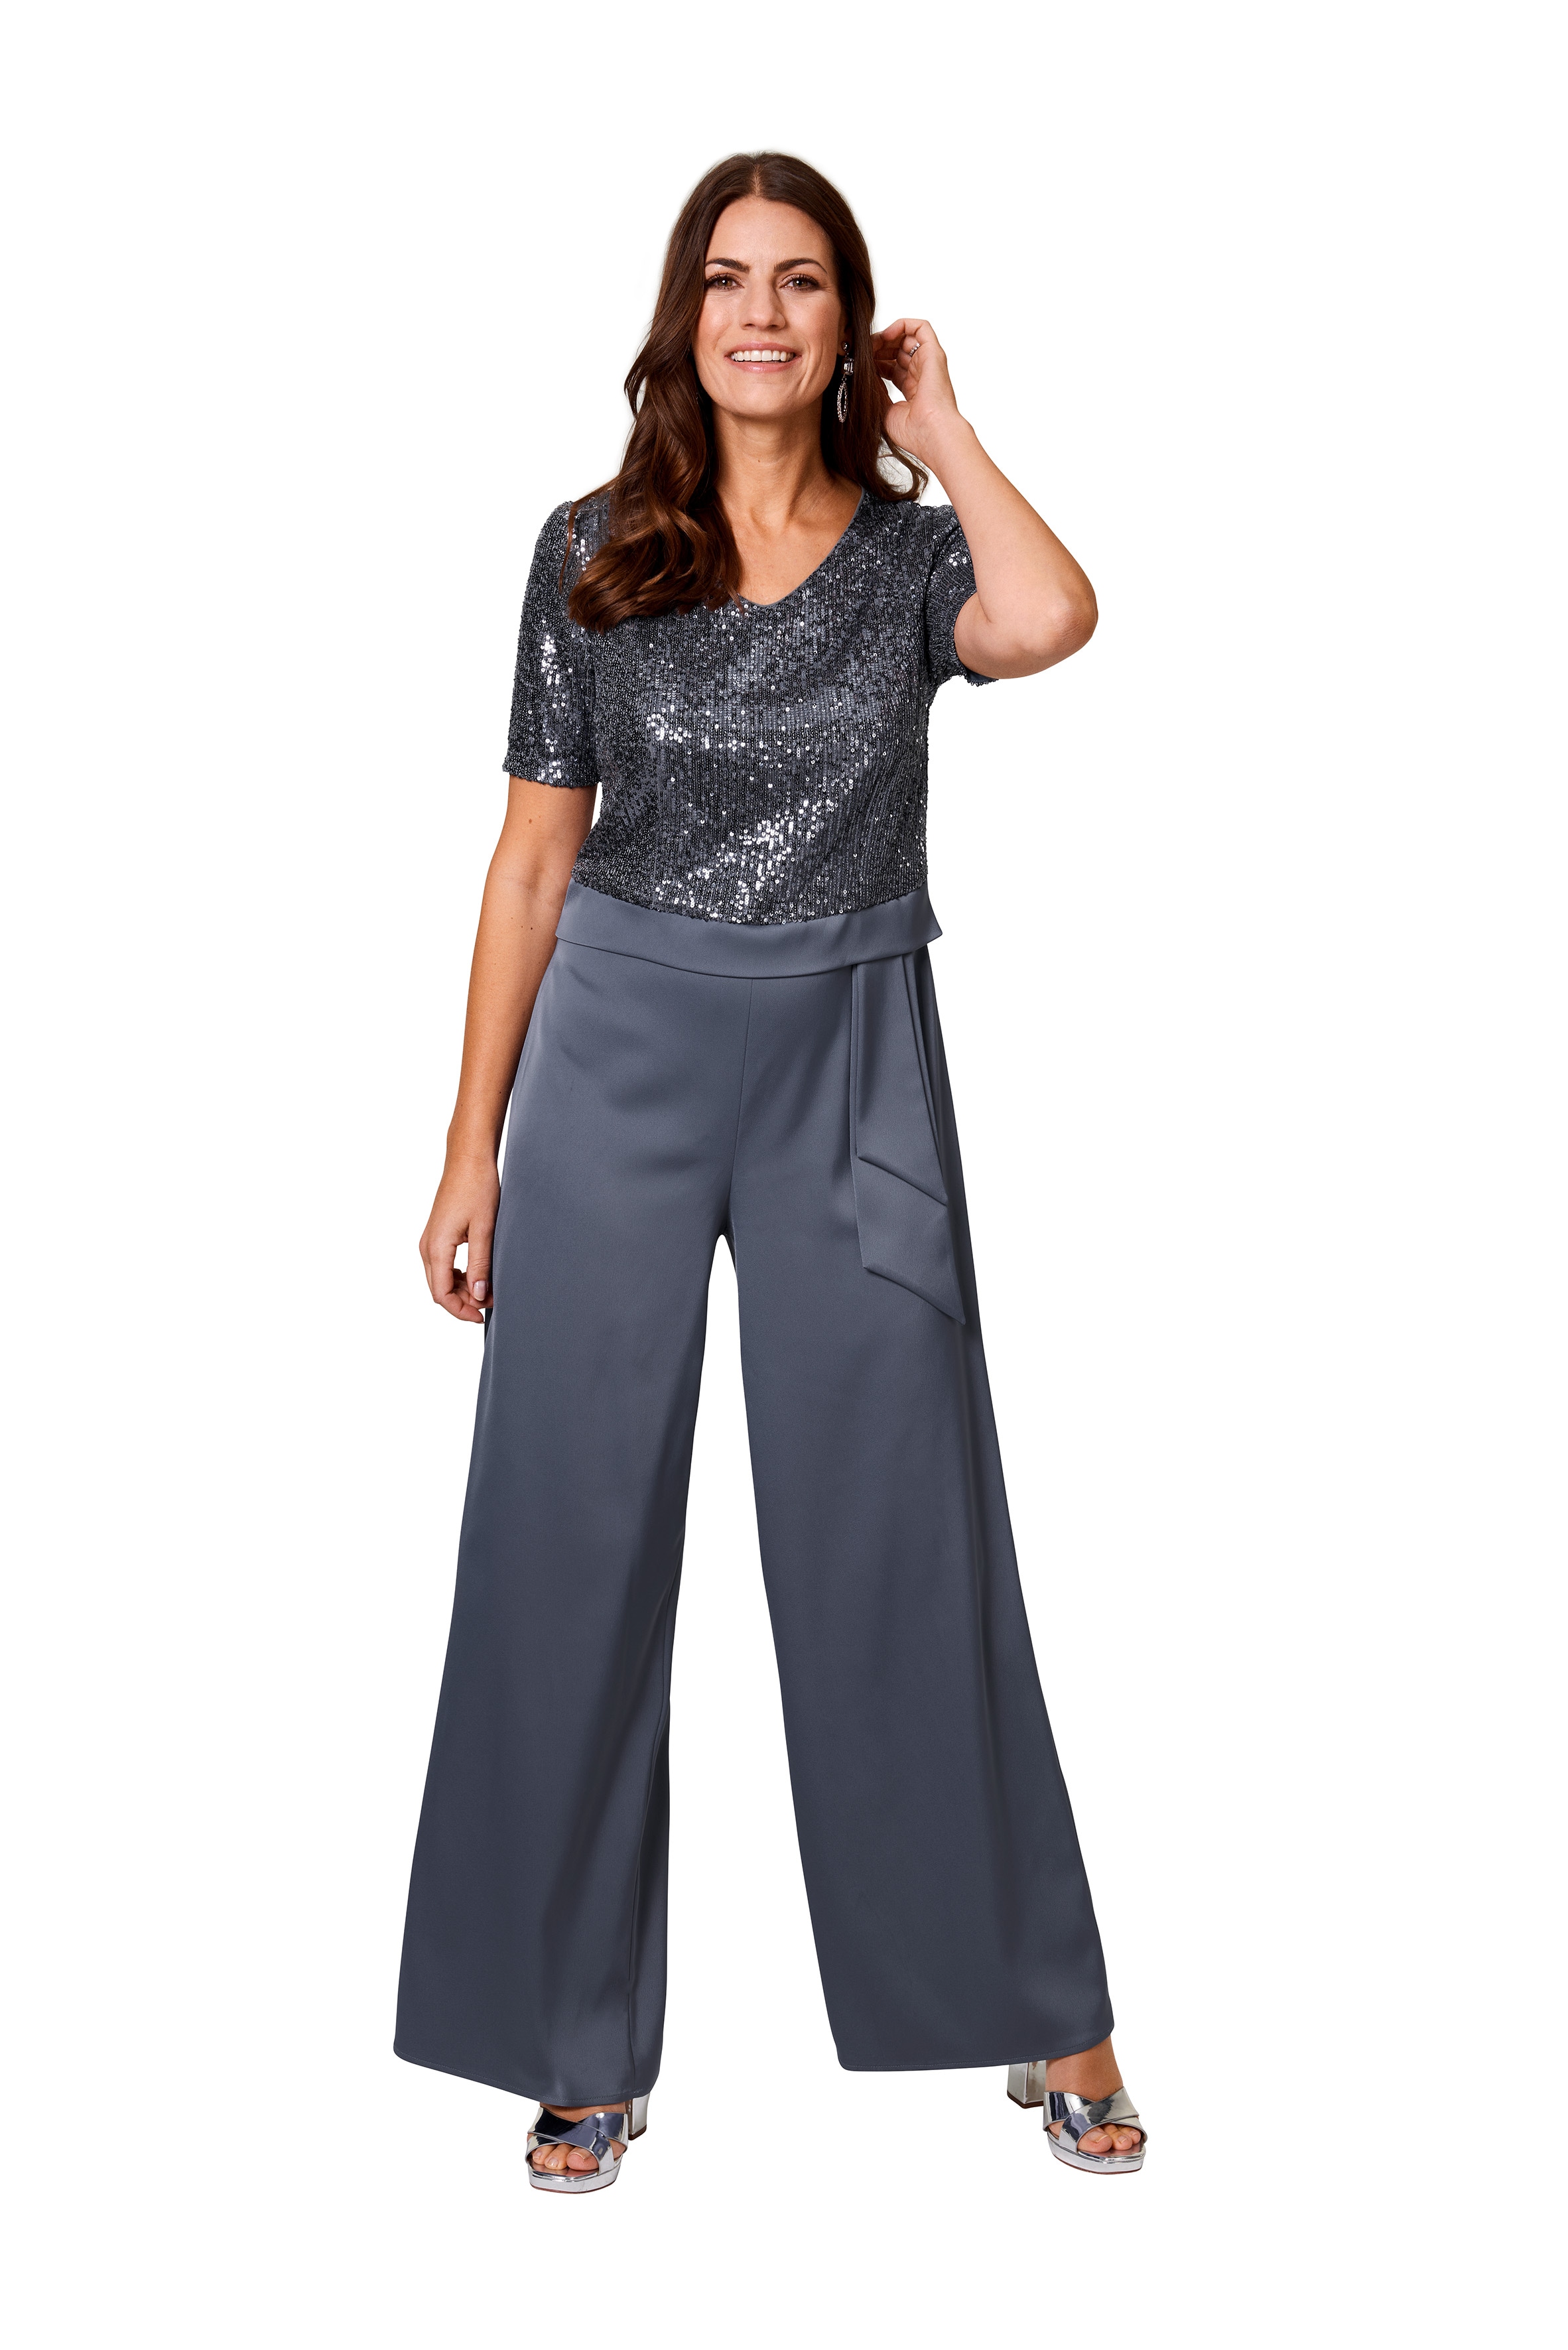 HERMANN LANGE Collection Culotte-Overall, mit Pailletten-hermann lange collection 1